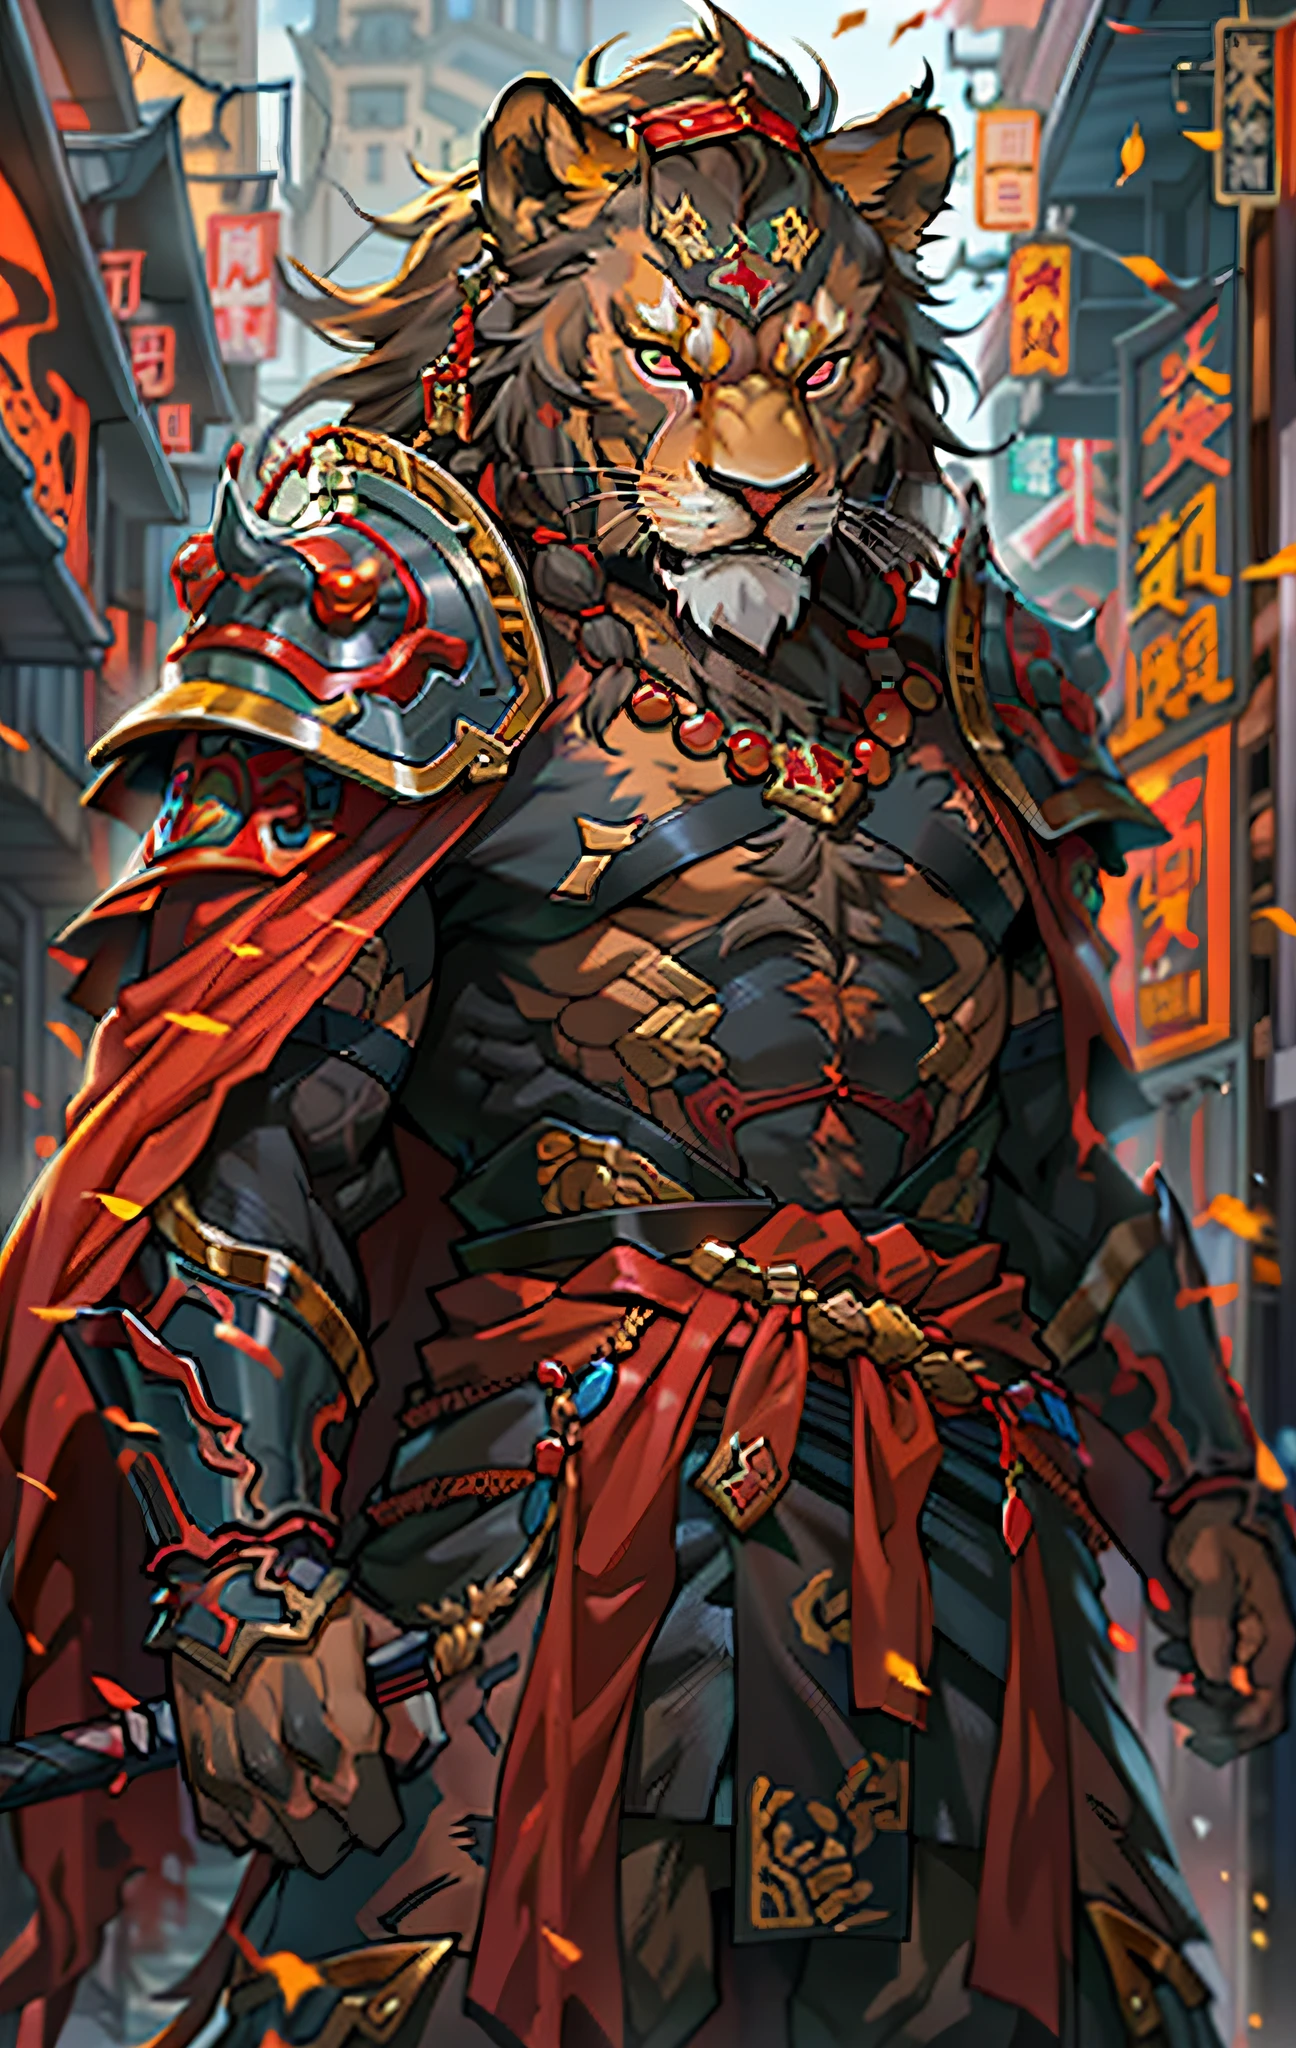 Lion warriors, Full body like，Close-up of lion warrior holding a sword in the city, Determined eyes，Fierce，Akira in Chinese mythology, an epic majestical degen trader, bian lian, by Yang J, Chinese Warrior, fire lion, Son Goku, cgsociety and fenghua zhong, inspired by Li Kan, epic samurai warrrior, Cat Warrior, lord of beasts, Red tattered cloak，Armour，Full body standing painting，Fantasy setting, character concept, character art, Character portrait, Cartoon, Best quality, Best resolution, 4K, Vivid colors, Vivid, High detail, best detail, confident pose, extrovert, look from down, Serious expression